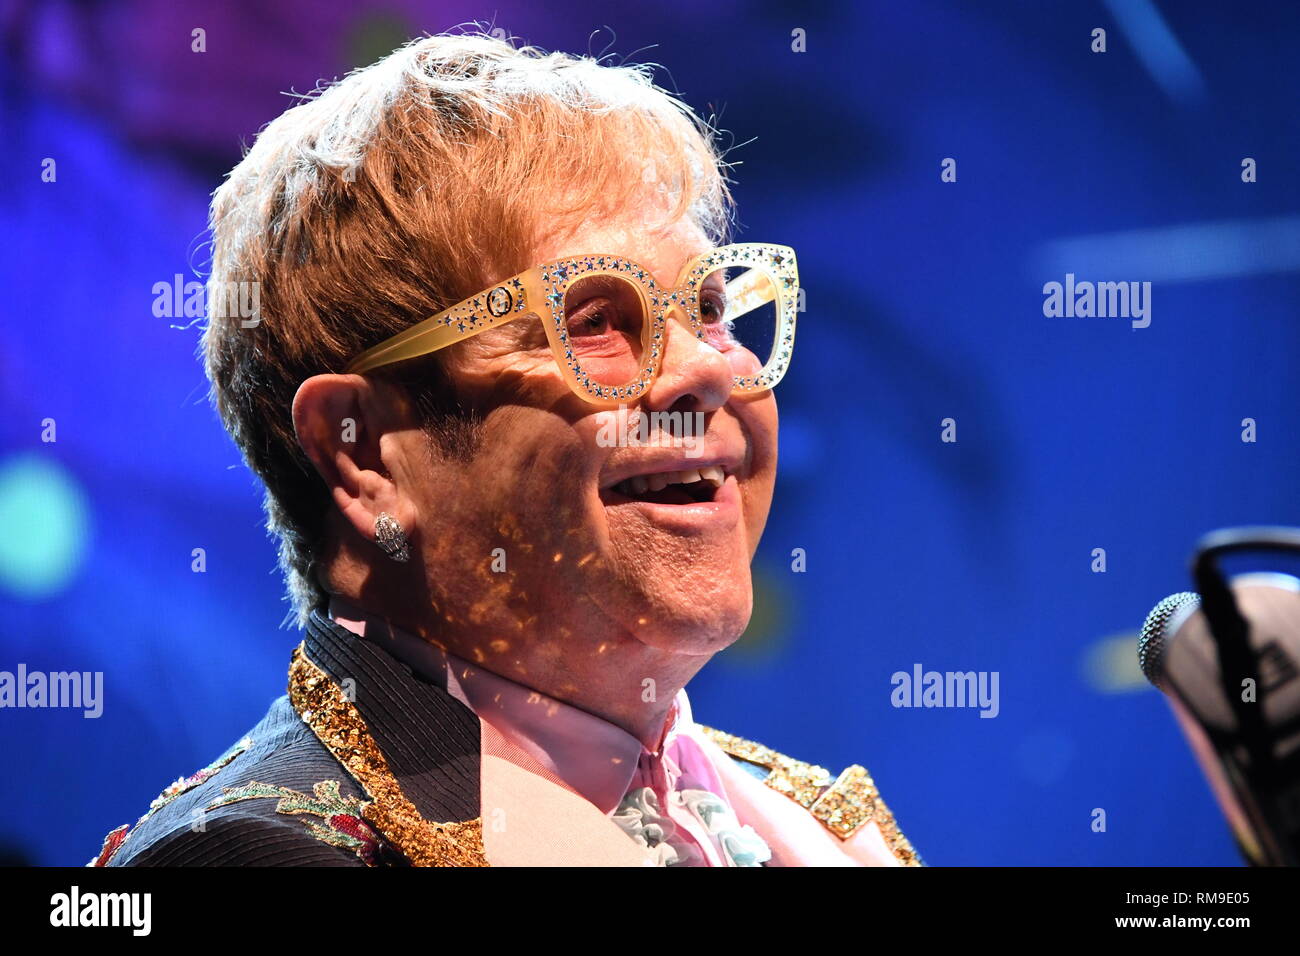 Musician Elton John is shown performing on stage during his 'Farewell Yellow Brick' concert tour. Stock Photo